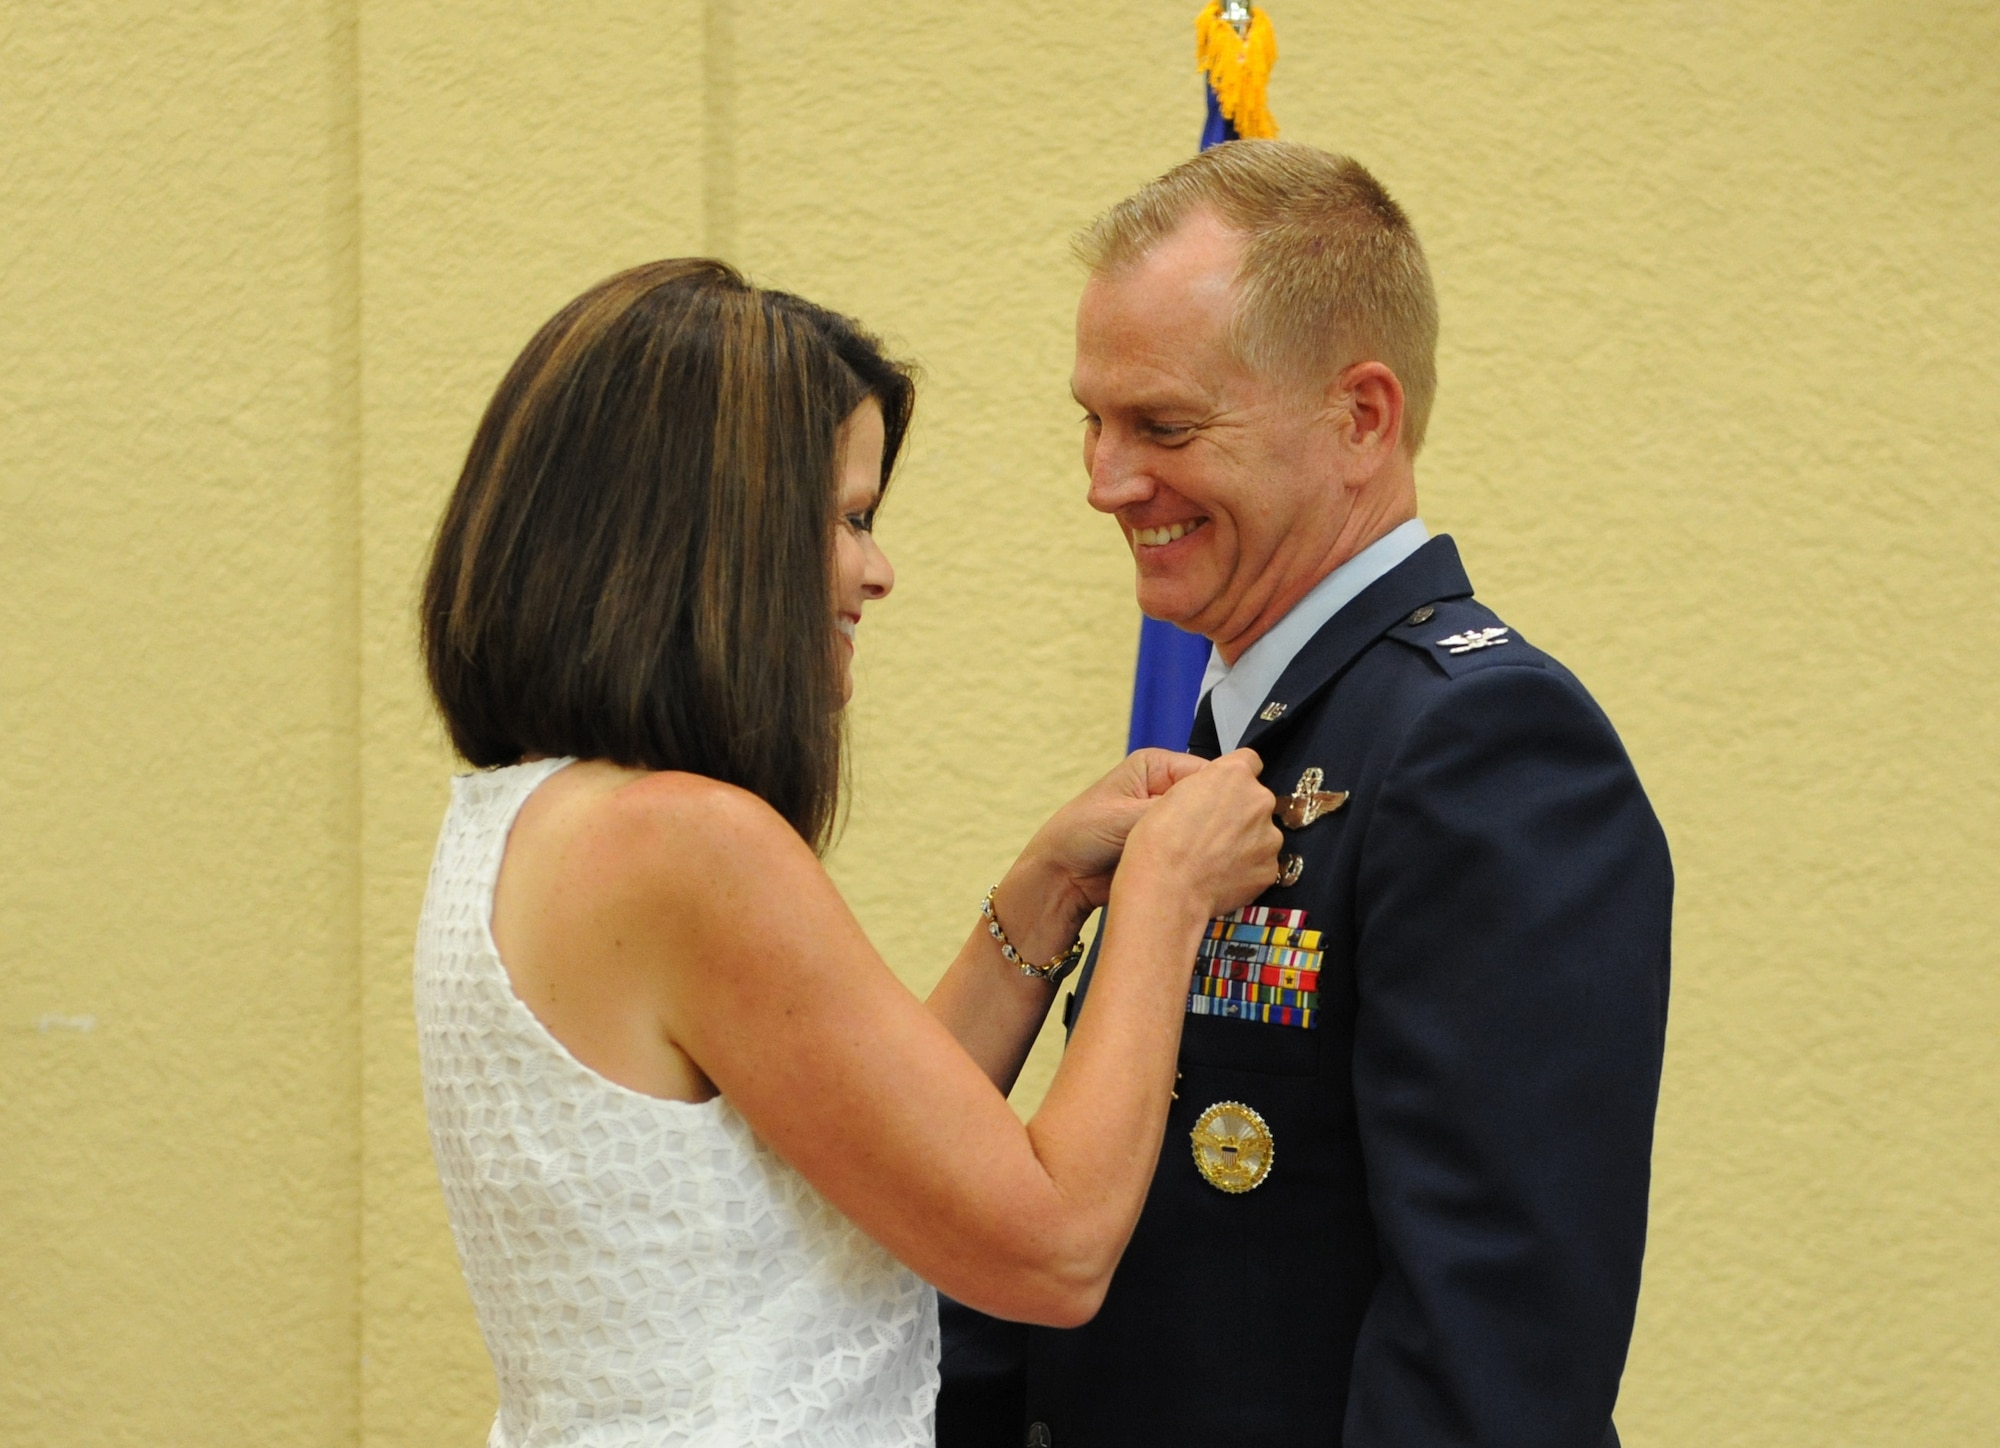 Mary Scarborough presents a retirement pin to her husband, Col. Dennis Scarborough, 81st Training Wing vice commander, during his retirement ceremony at the Bay Breeze Event Center June 28, 2016, on Keesler Air Force Base, Miss. Scarborough retired with 27 years of military service. He has served multiple tours as an F-15C instructor and evaluator and has held positions in the fields of defense policy, operational plans, safety and aircraft maintenance. He has commanded at the squadron level and served as an operations group deputy commander. (U.S. Air Force photo by Kemberly Groue/Released)